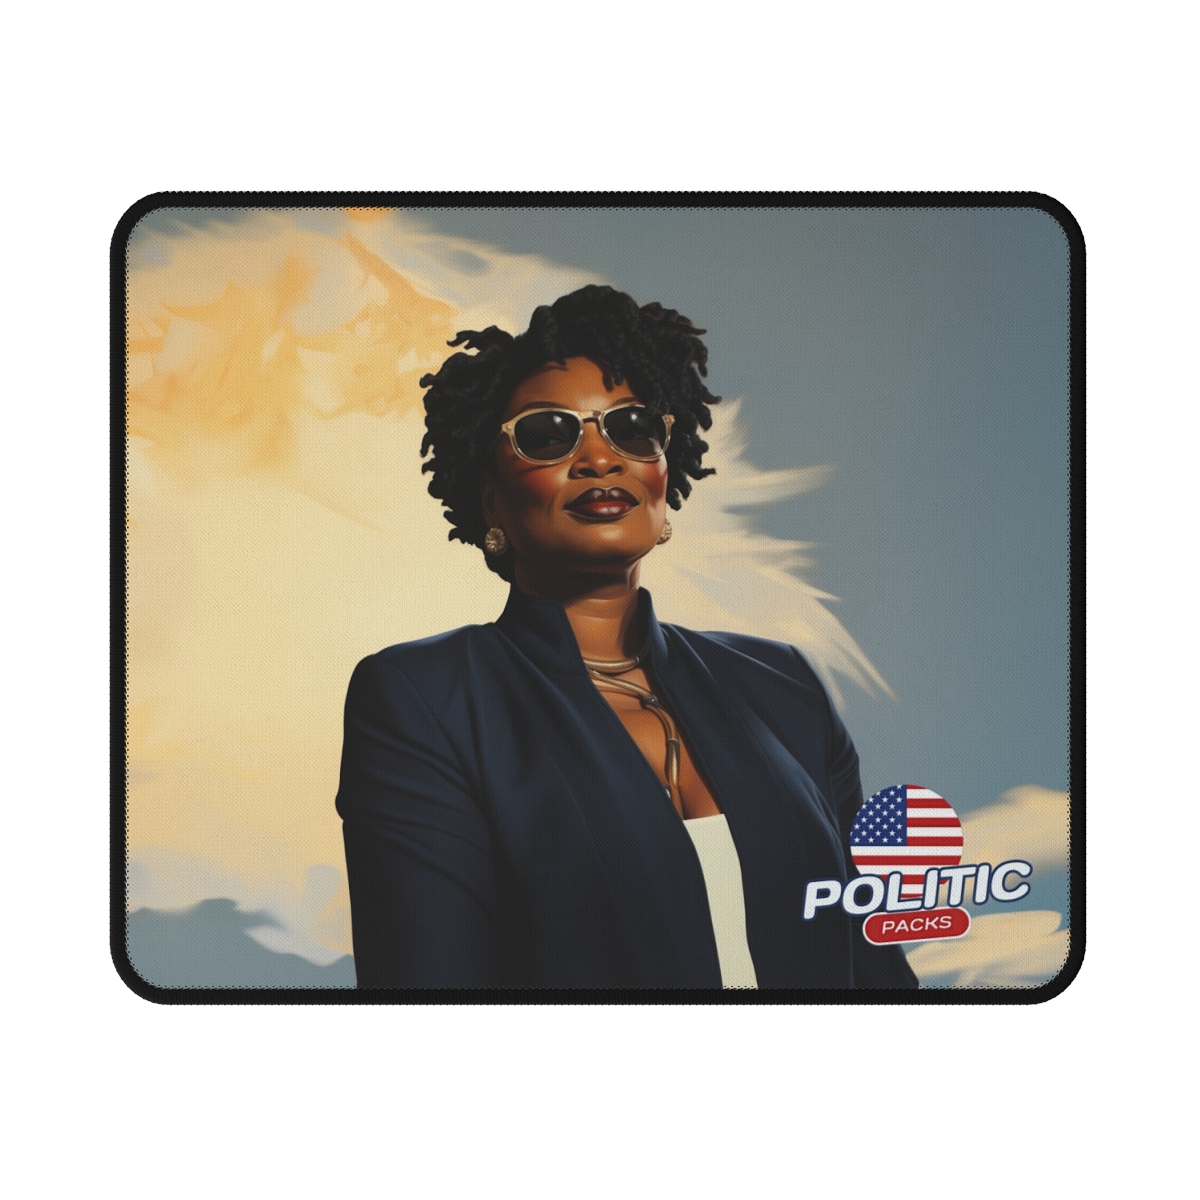 Stacey Abrams Mouse Pad – Politic Packs Edition